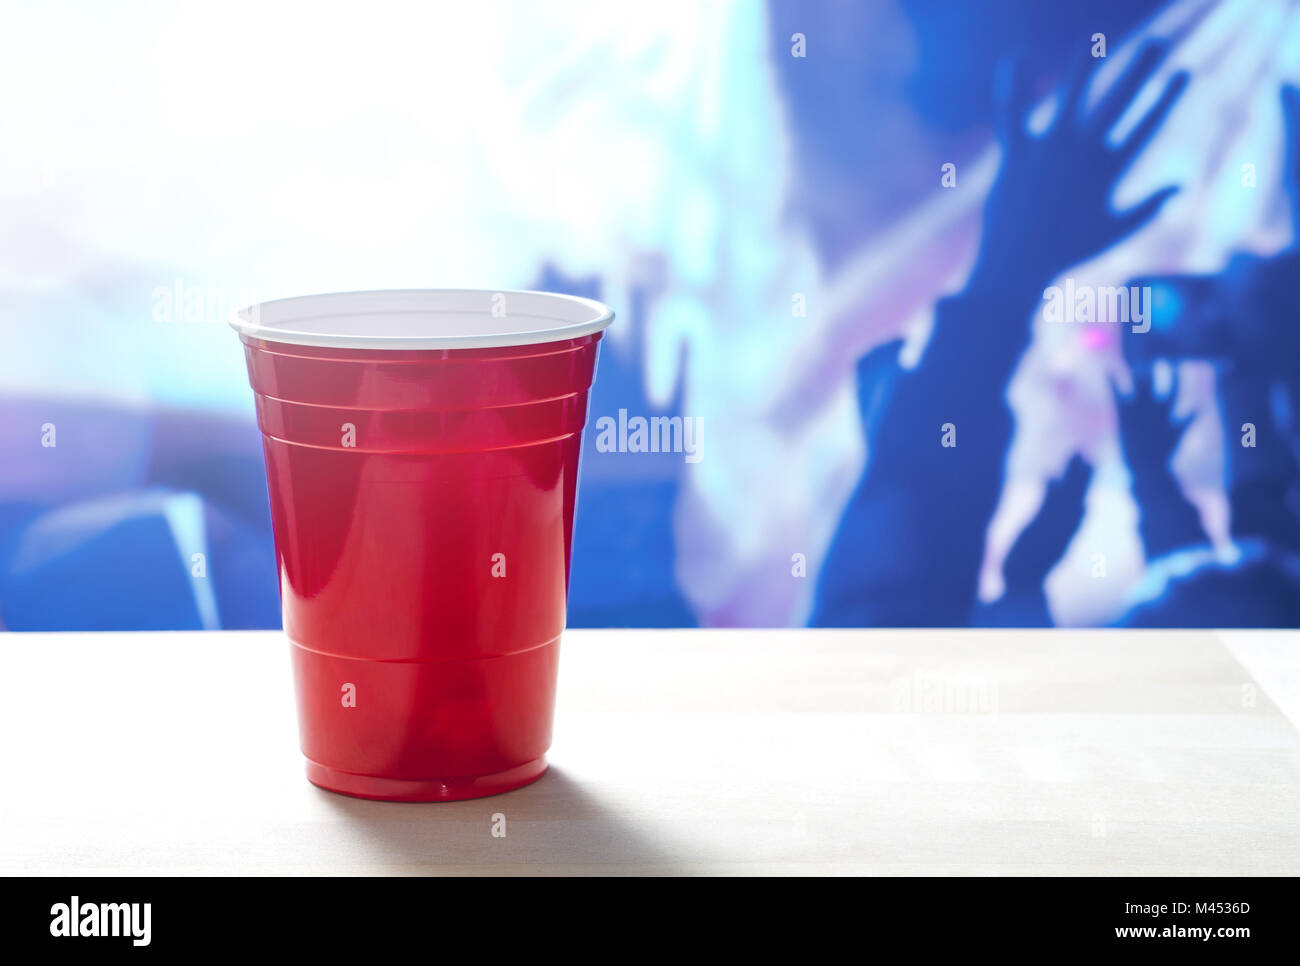 Plastic red party cup on a table. Nightclub full of people dancing on the dance floor in the background. Disco lighting. Perfect for marketing. Stock Photo